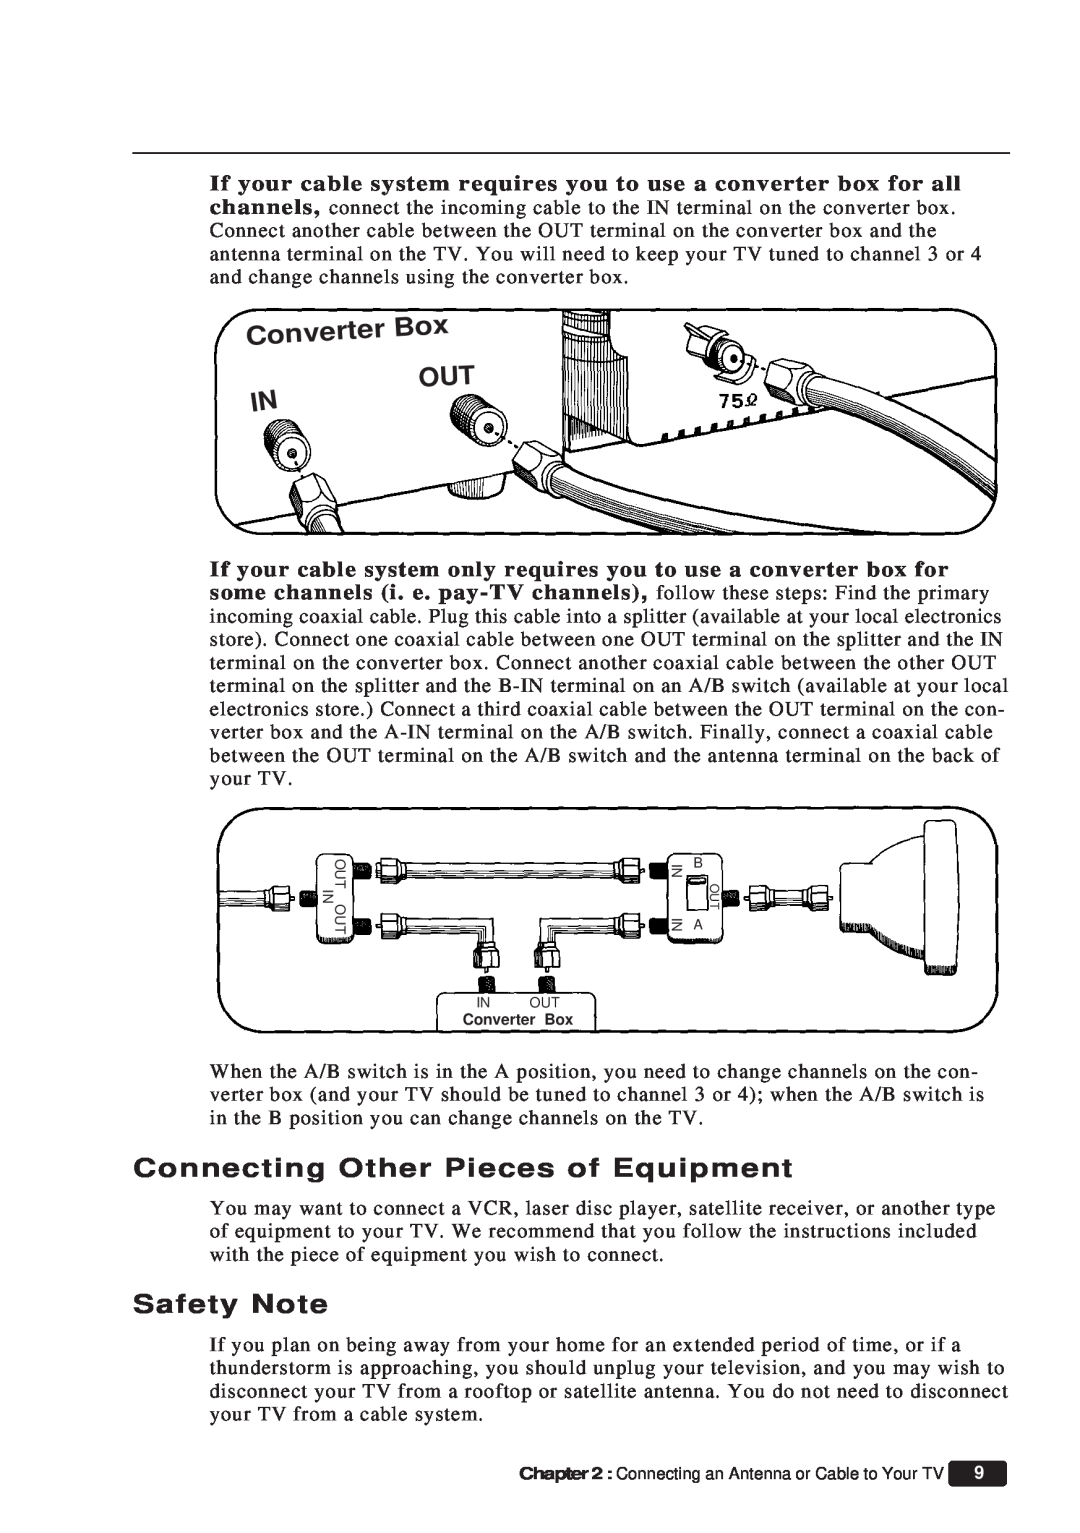 Daewoo ET 19P2, ET 13P2 instruction manual Converter, Connecting Other Pieces of Equipment, Safety Note, Out Out In, In Out 